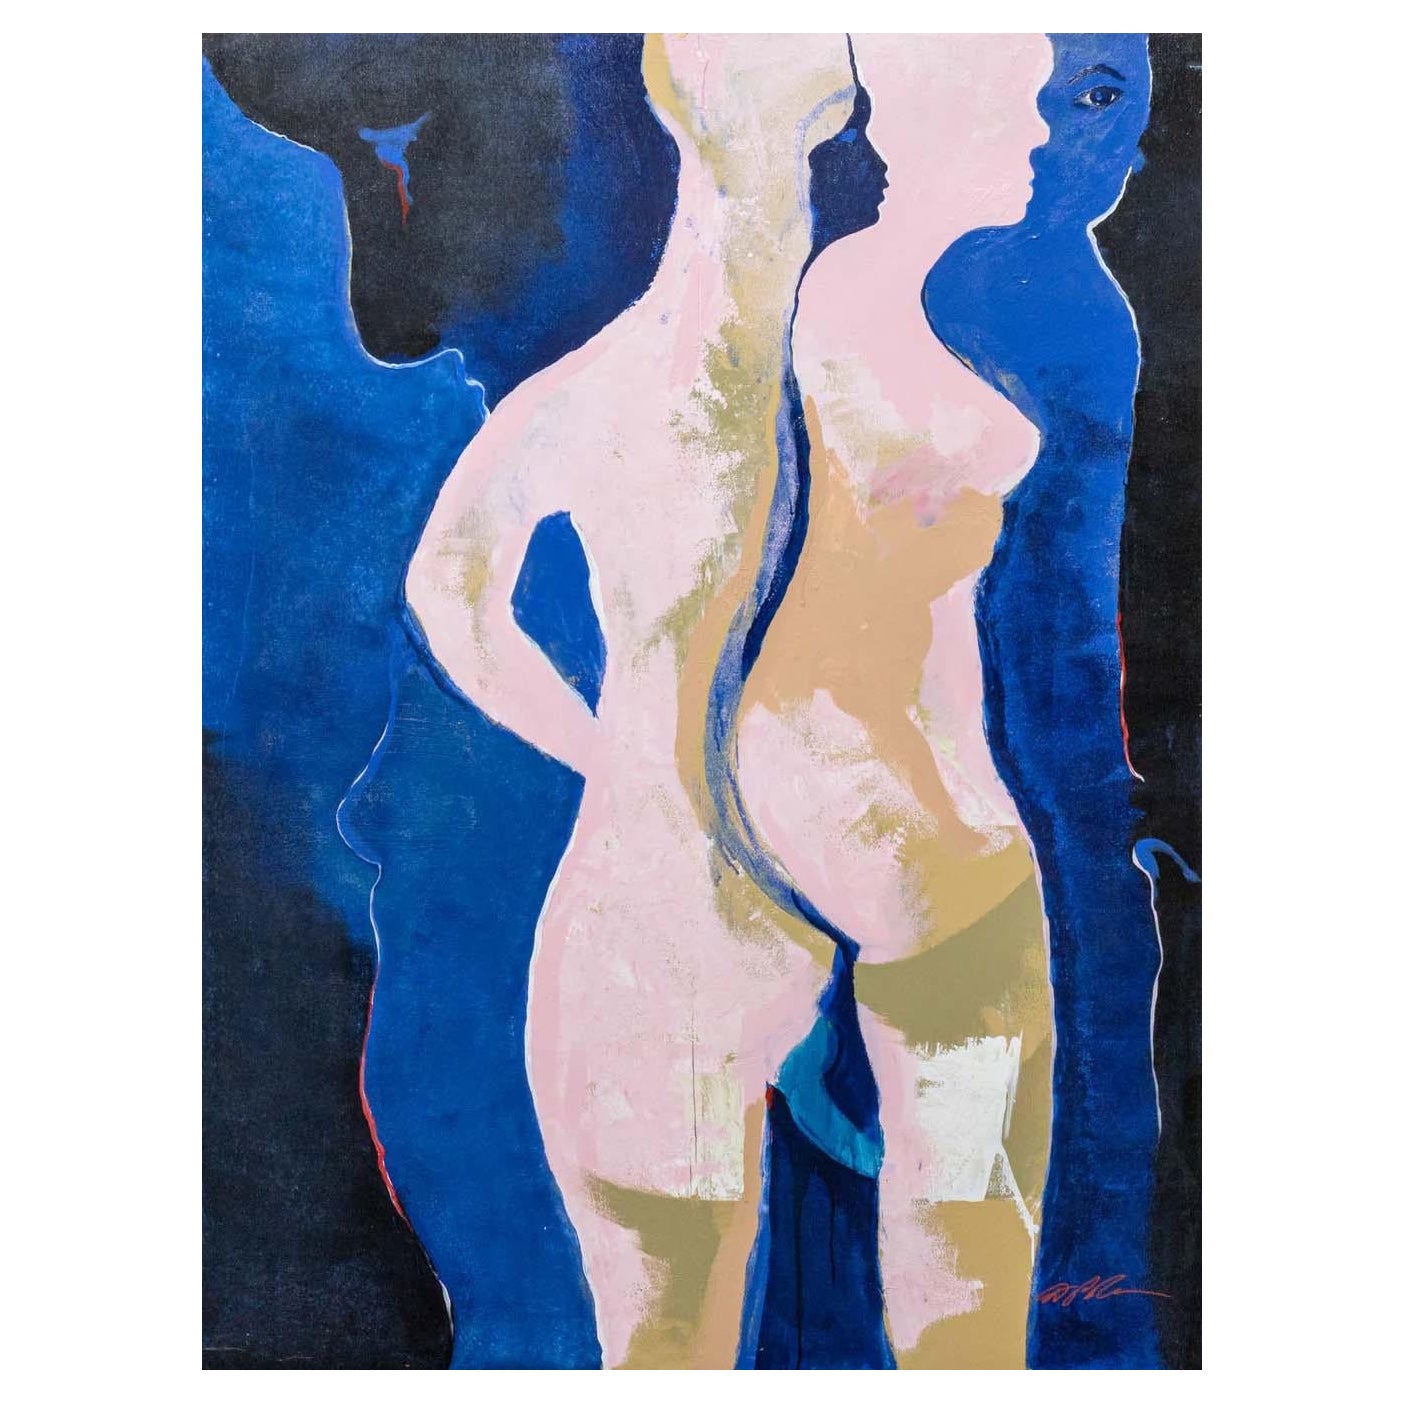 Dominic Pangborn Nudes in Blue: A Studio Inspiration Unique Acrylic Painting